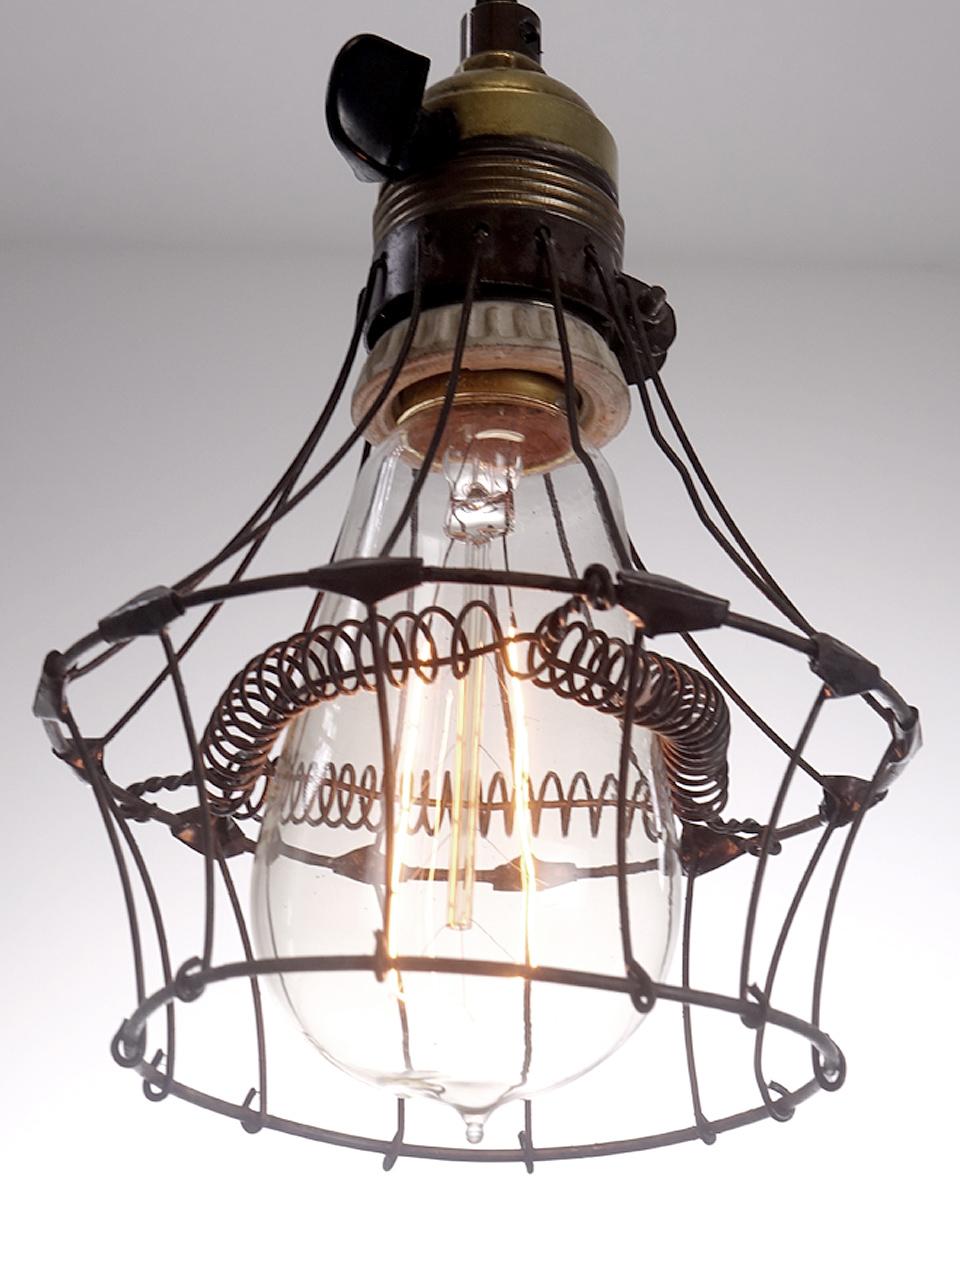 We love the basic simplicity of a protective wire cage over a bulb. Of all the early machine shop protective cages this is was one of the delicate and most interesting ever made. Look closely and you will see webbed joints where the wires cross as